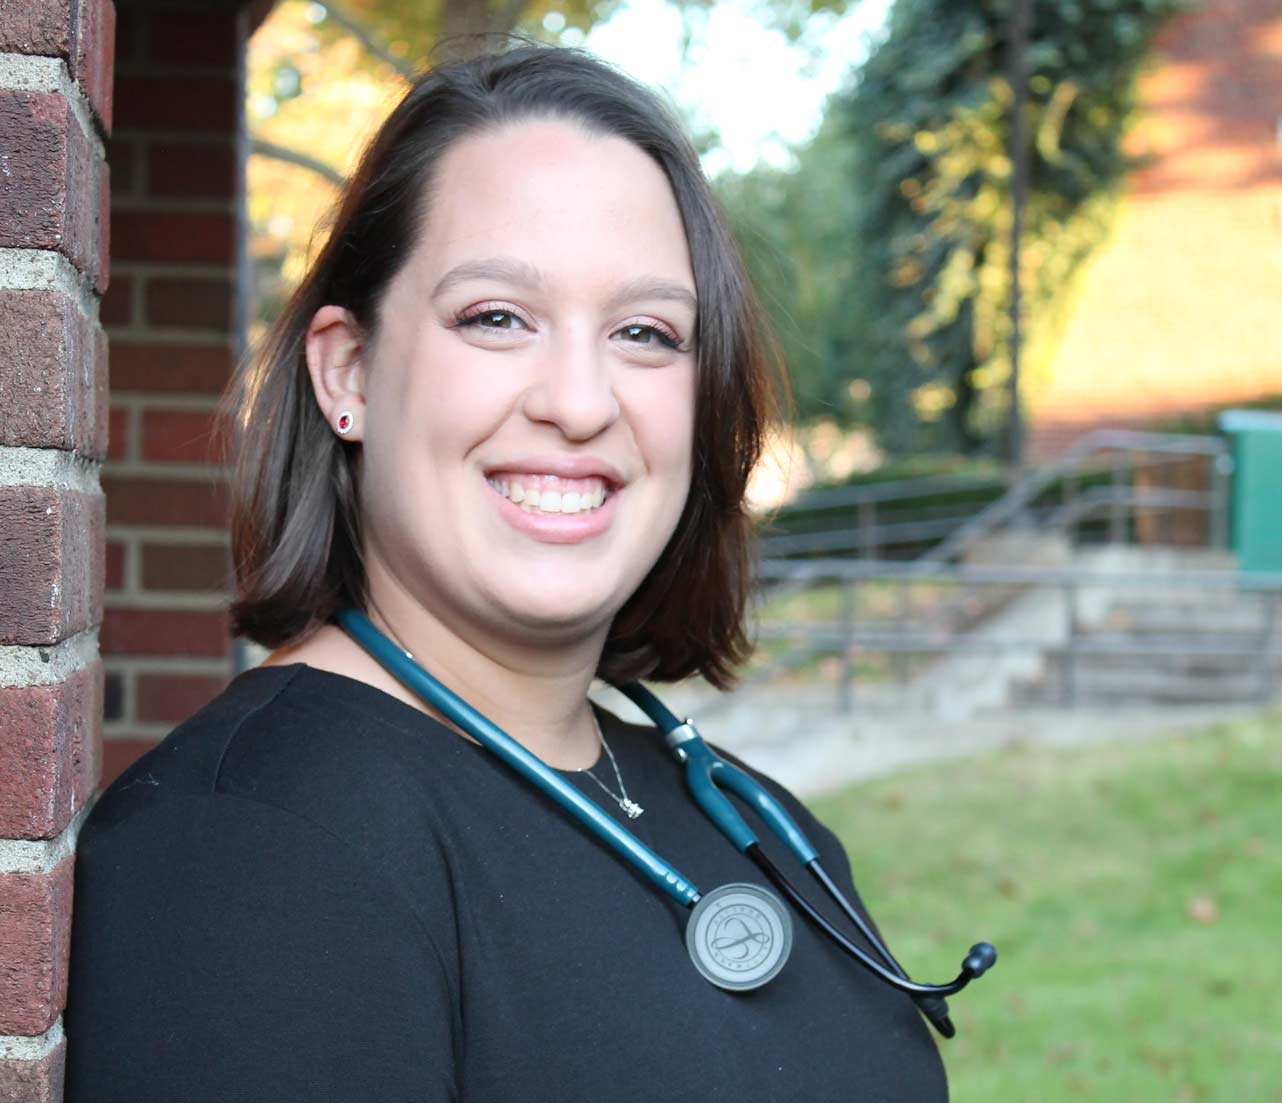 Susan Rollinson poses on campus with stethoscope